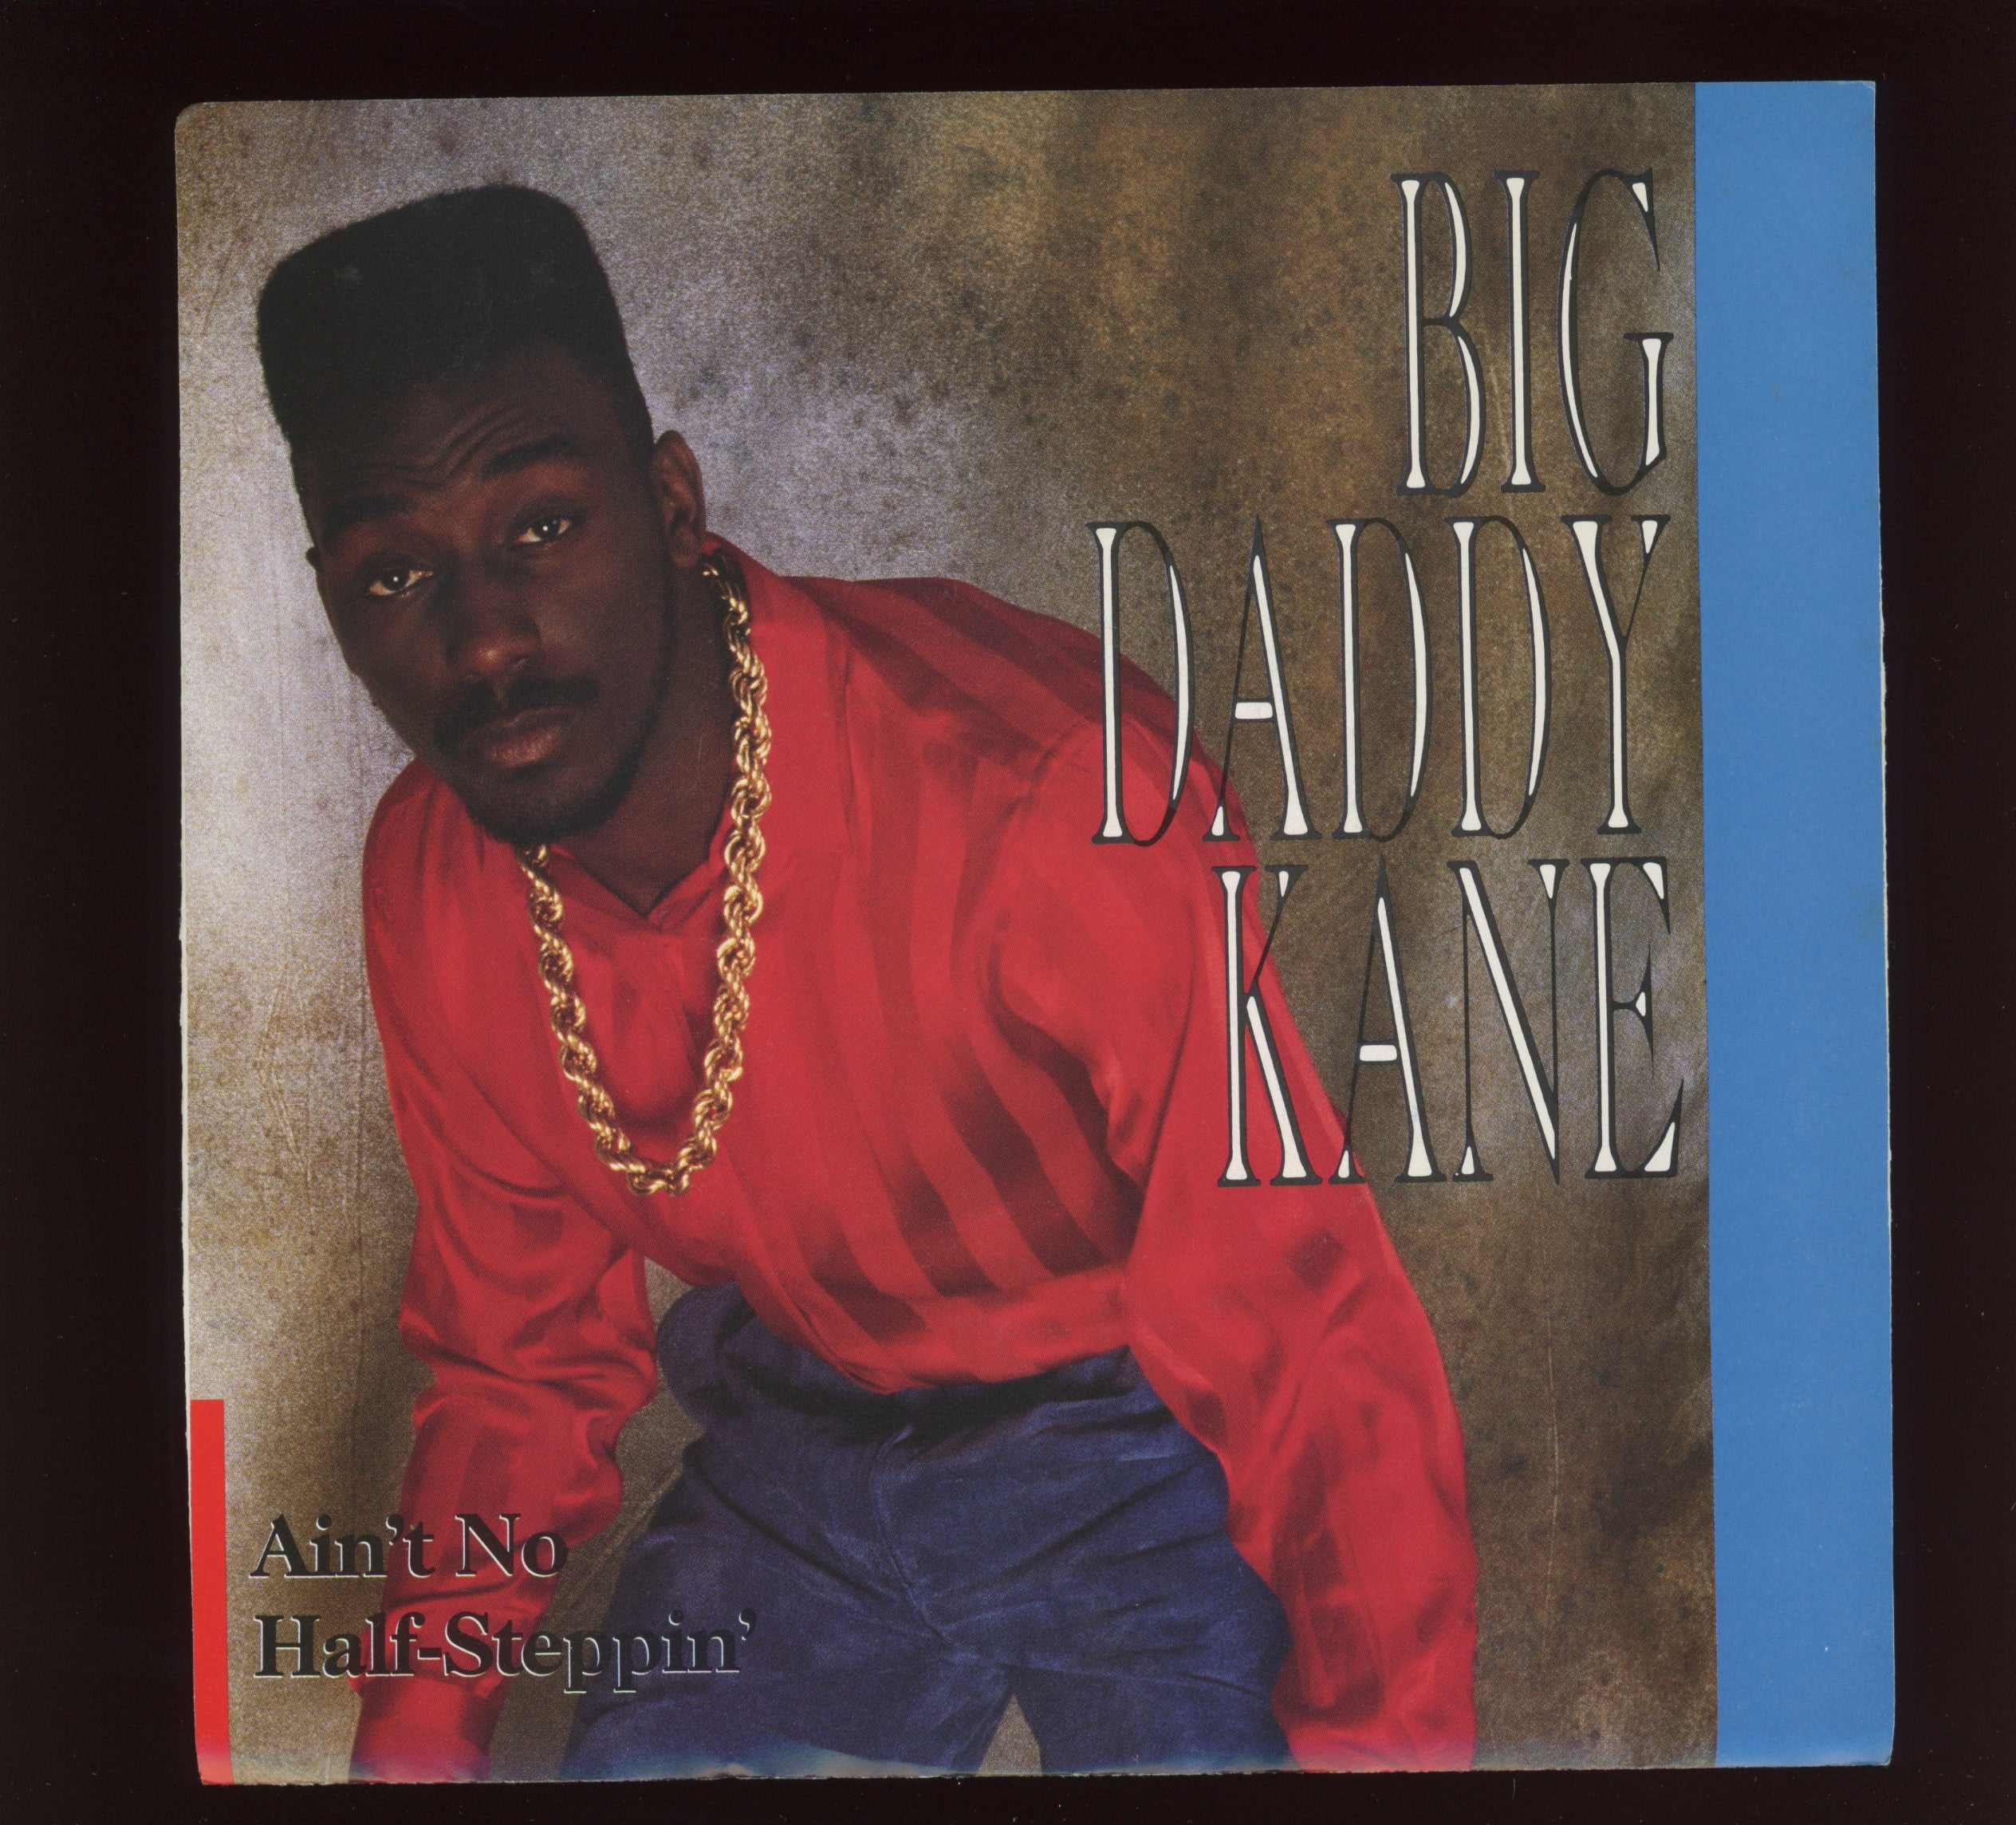 Big Daddy Kane - Ain't No Half-Steppin' on Cold Chillin' With Picture Sleeve